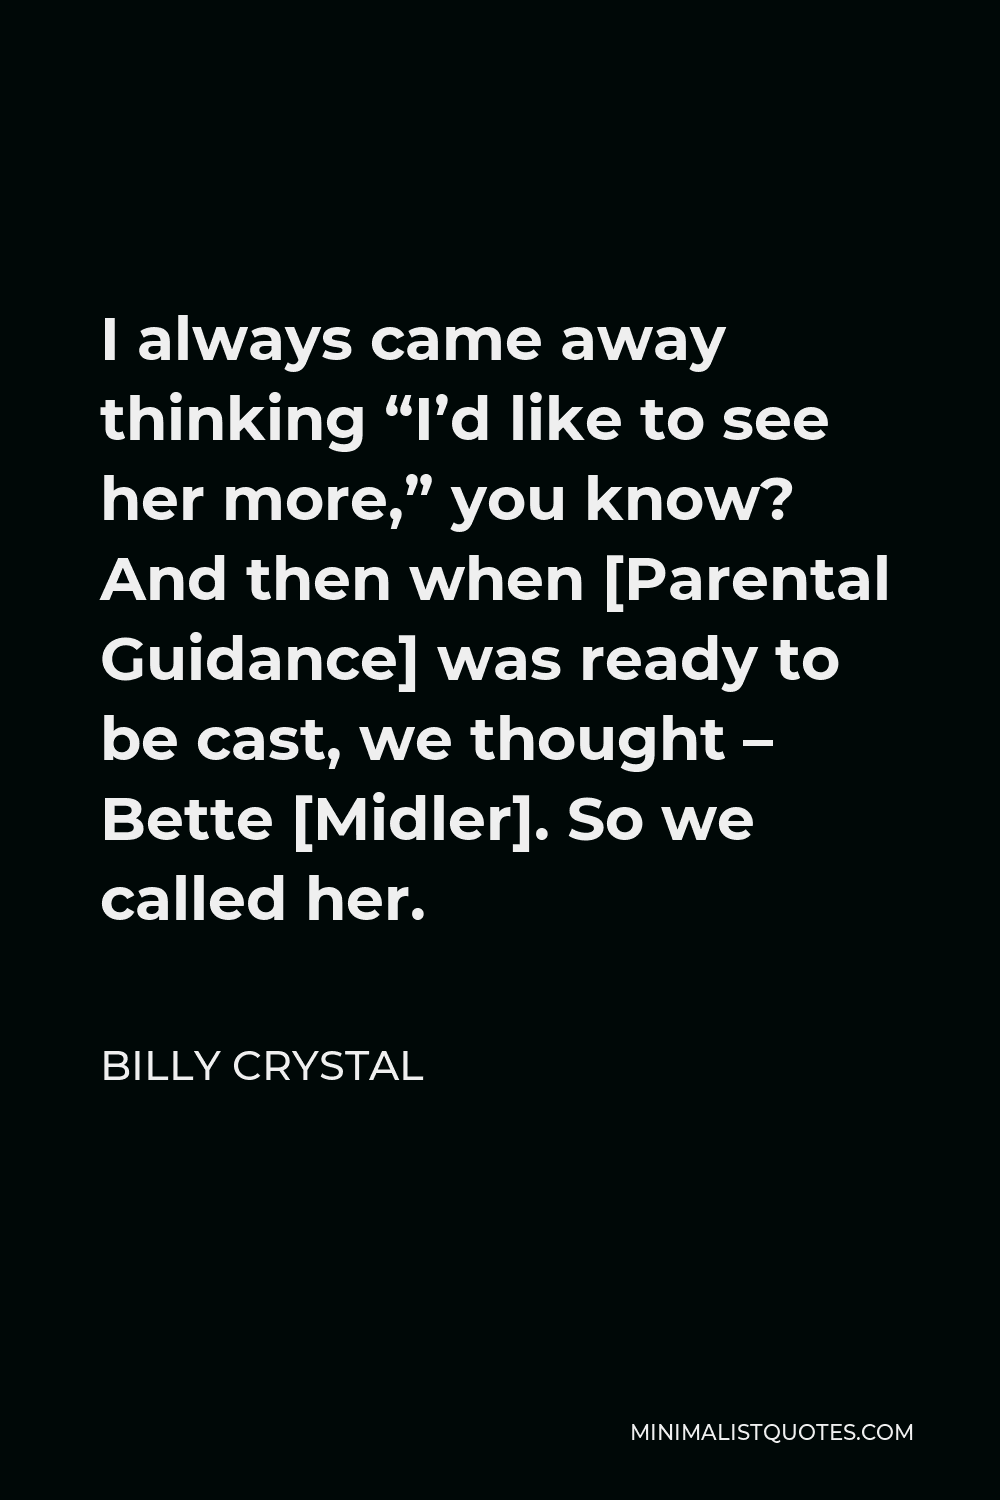 Billy Crystal Quote - I always came away thinking “I’d like to see her more,” you know? And then when [Parental Guidance] was ready to be cast, we thought – Bette [Midler]. So we called her.